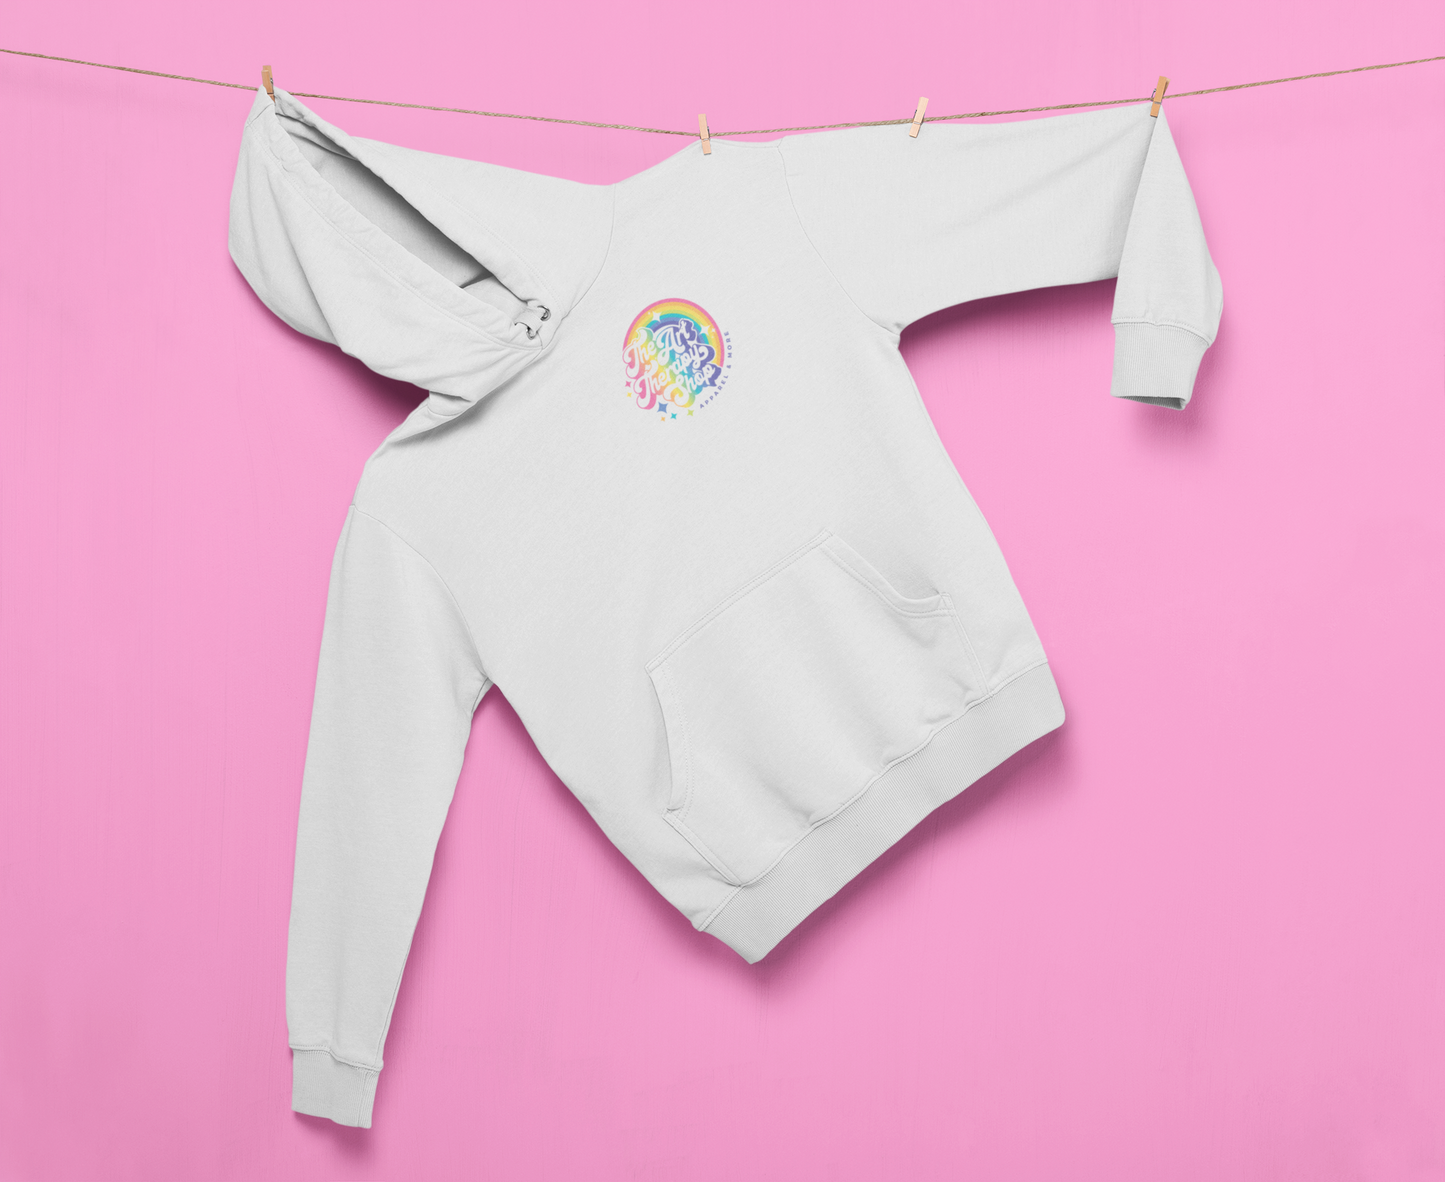 The Art Therapy Shop Logo Hoodie